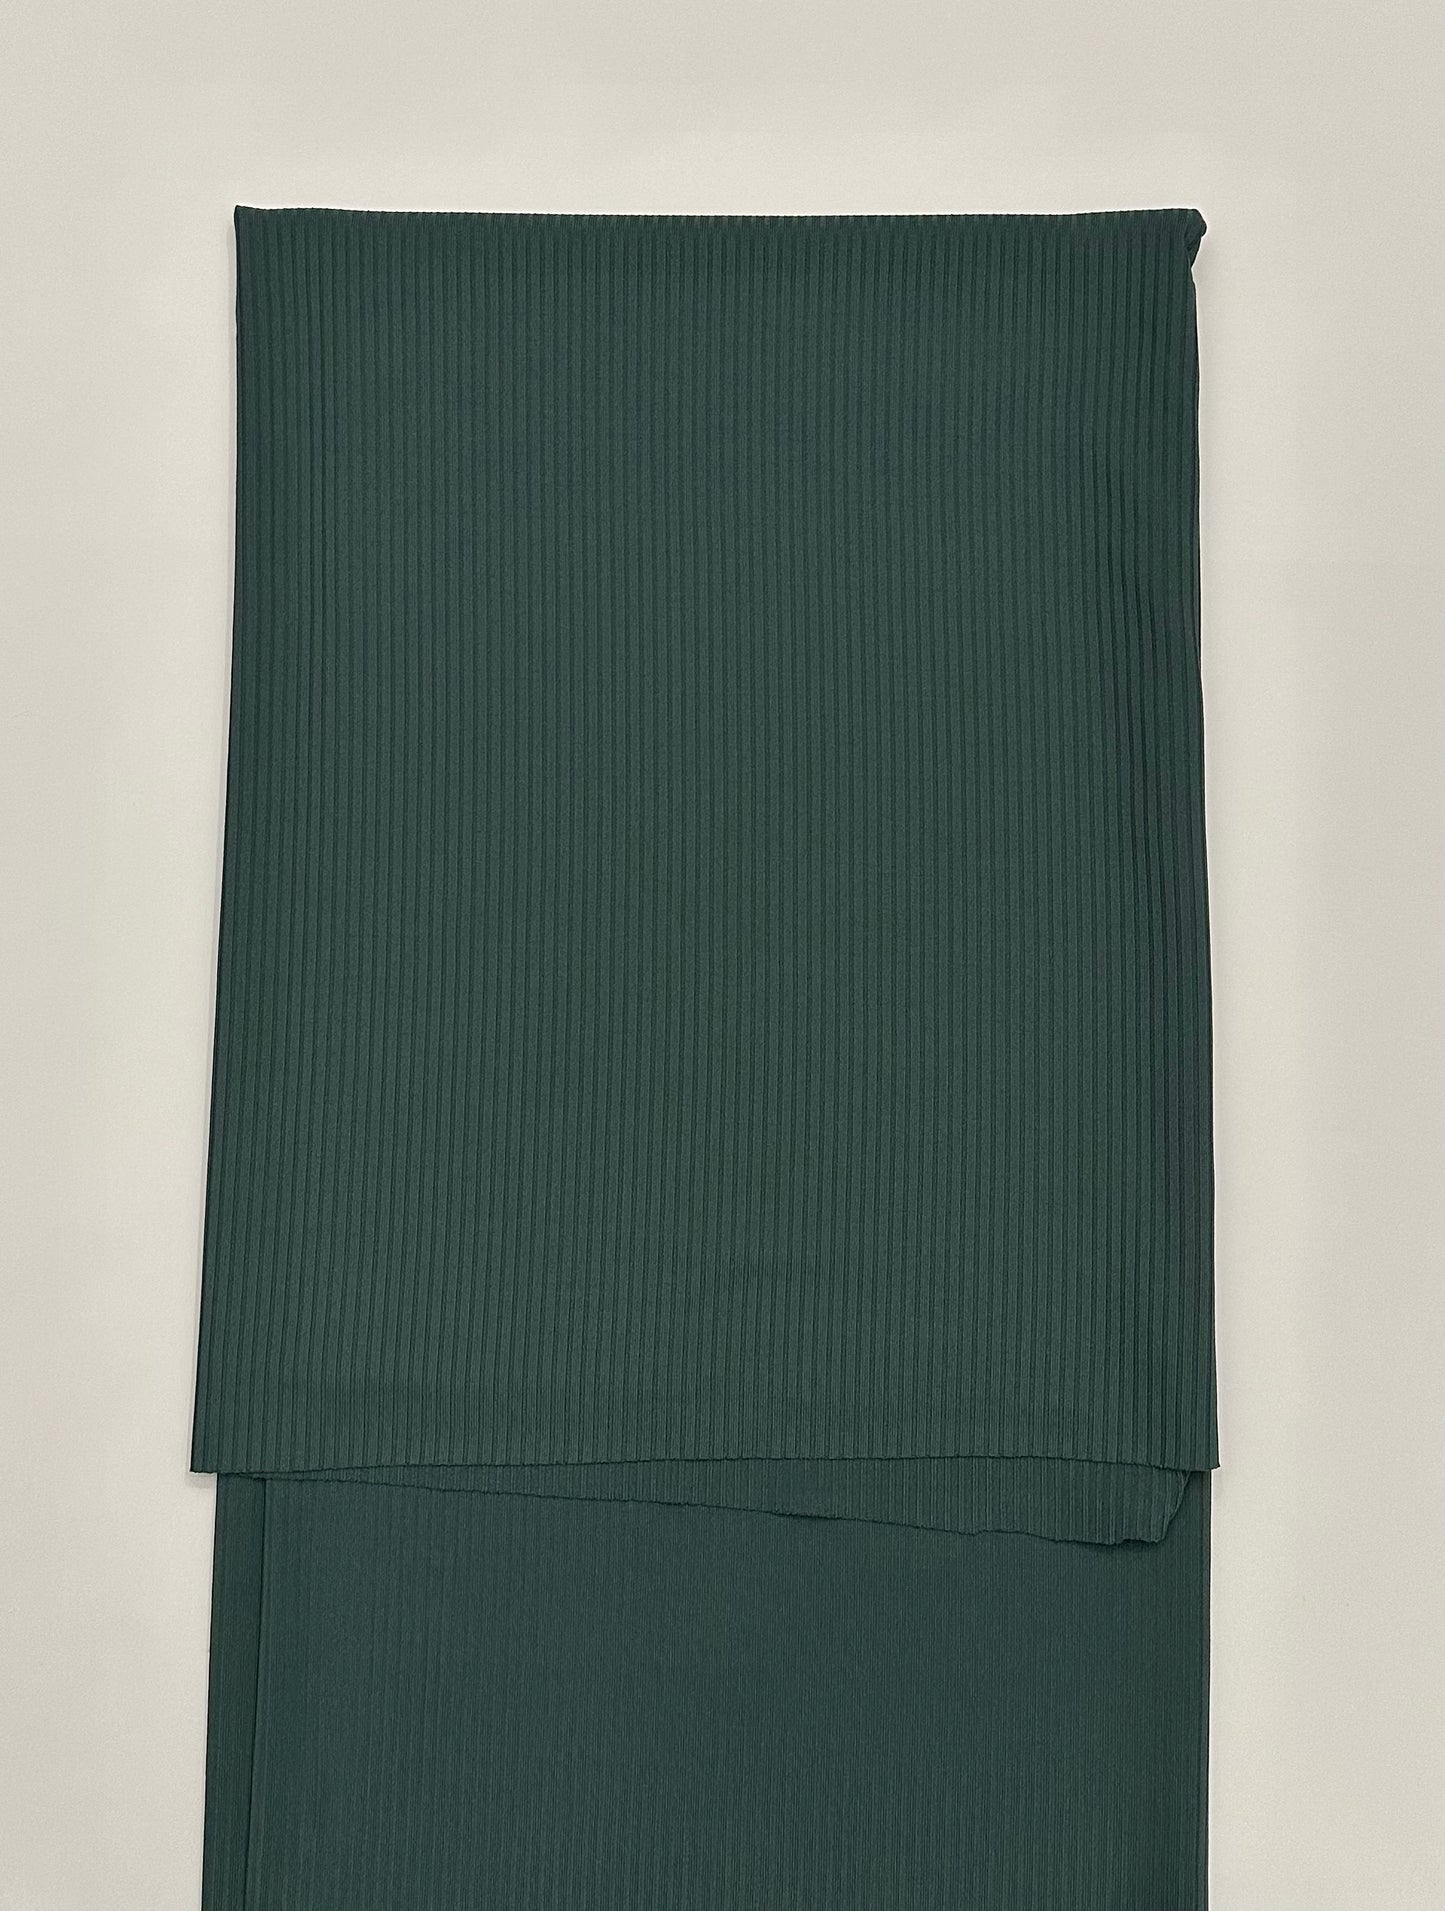 Solid in Evergreen on Unbrushed Rib Knit Fabric Sold by the 1/4 yard